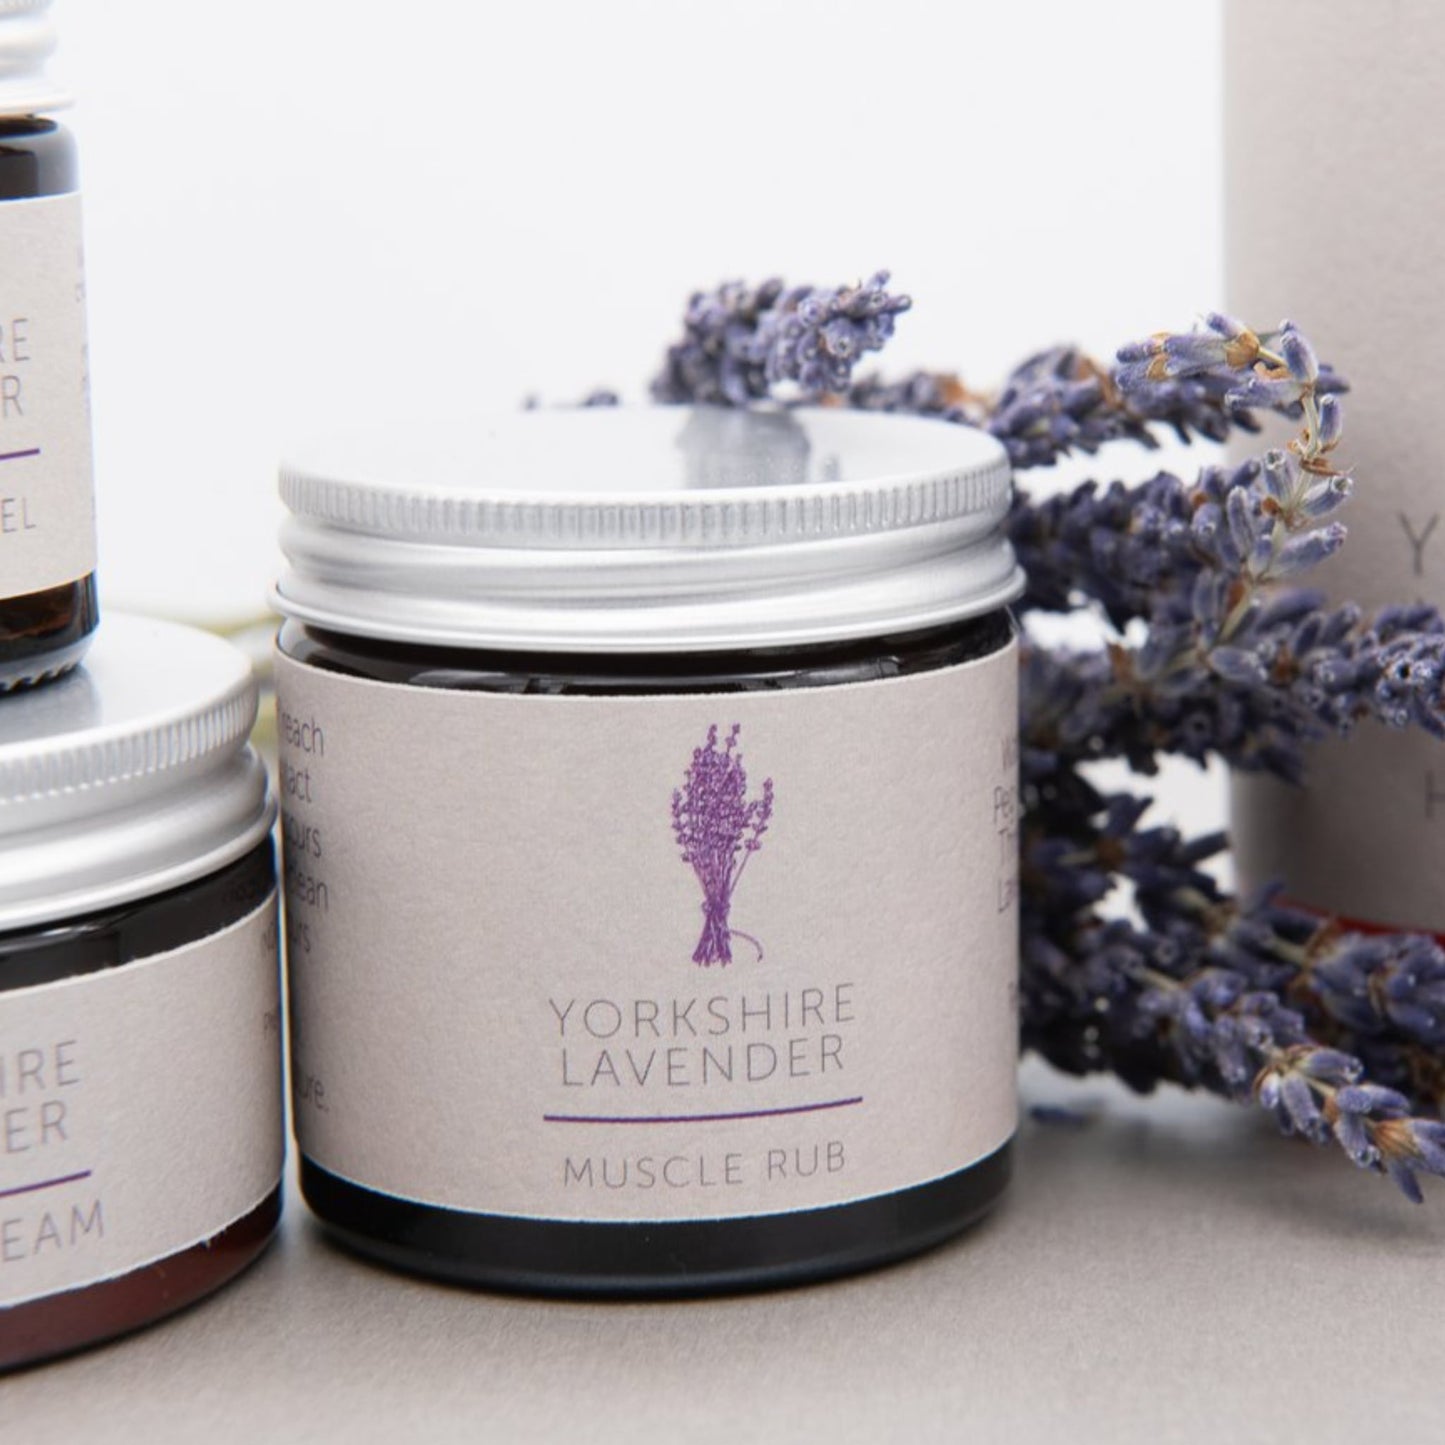 Yorkshire Lavender Muscle Rub - The Great Yorkshire Shop